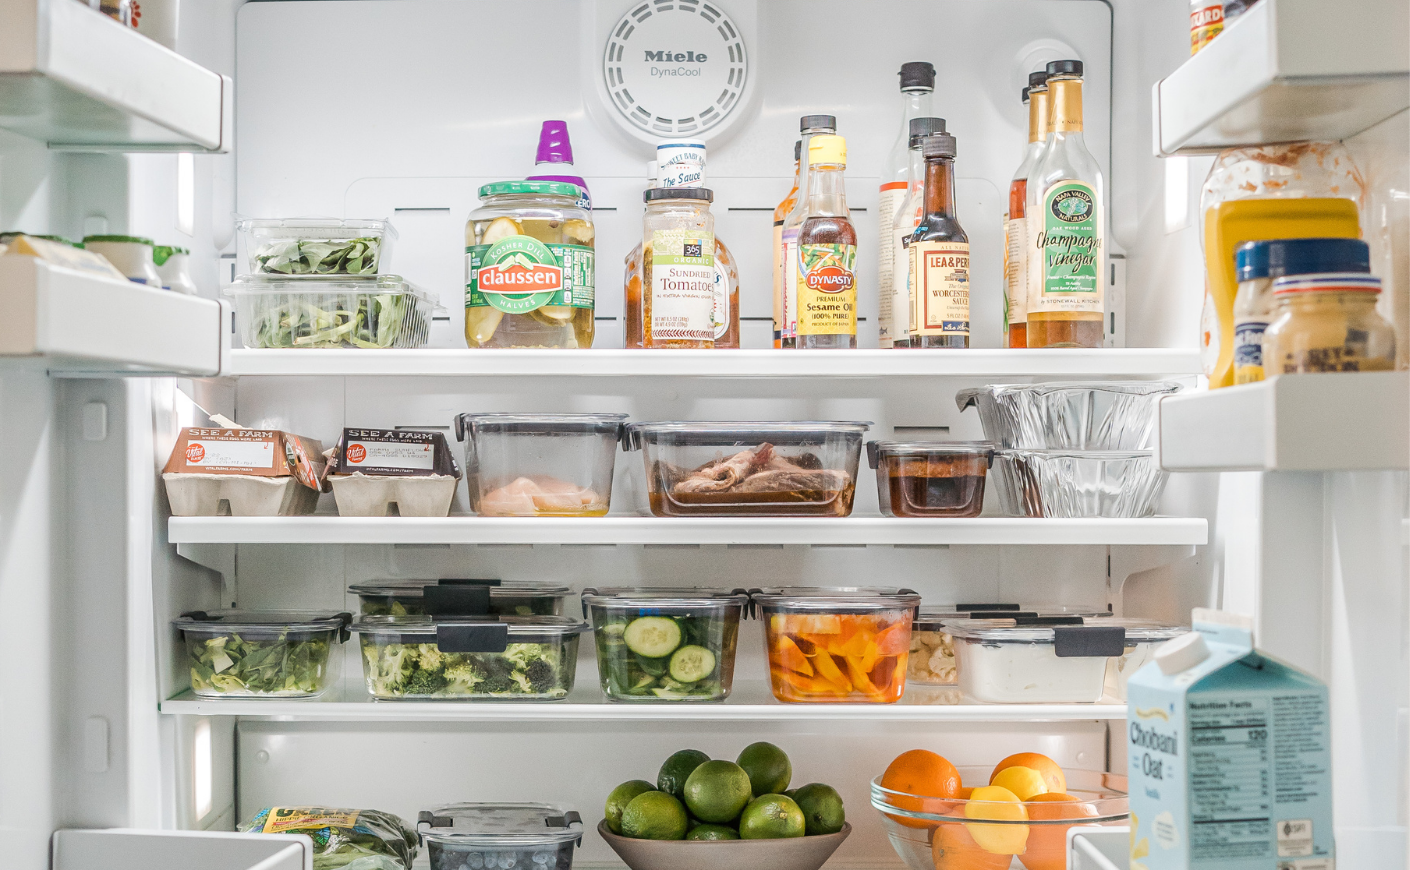 13 Tidy Tips To Achieve A Cleaner Refrigerator